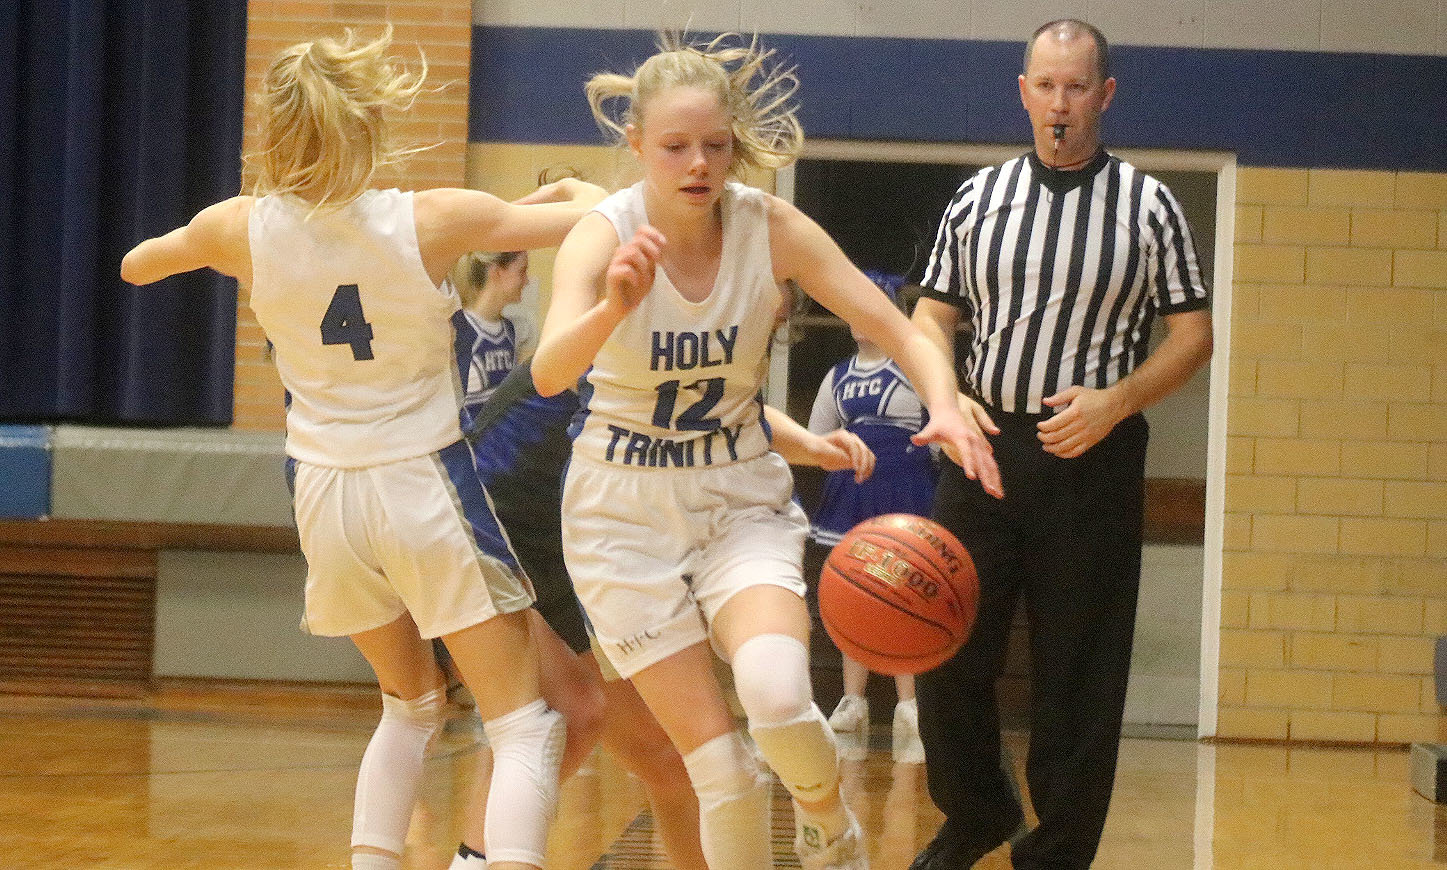 HTC's Natalie Randolph brings the ball up the floor in the 4th quarter, as Teagan Snaadt helps with the full quarter pressure. The Crusaders fell to the Arrows 48-45. Photo by Chuck Vandenberg/PCC